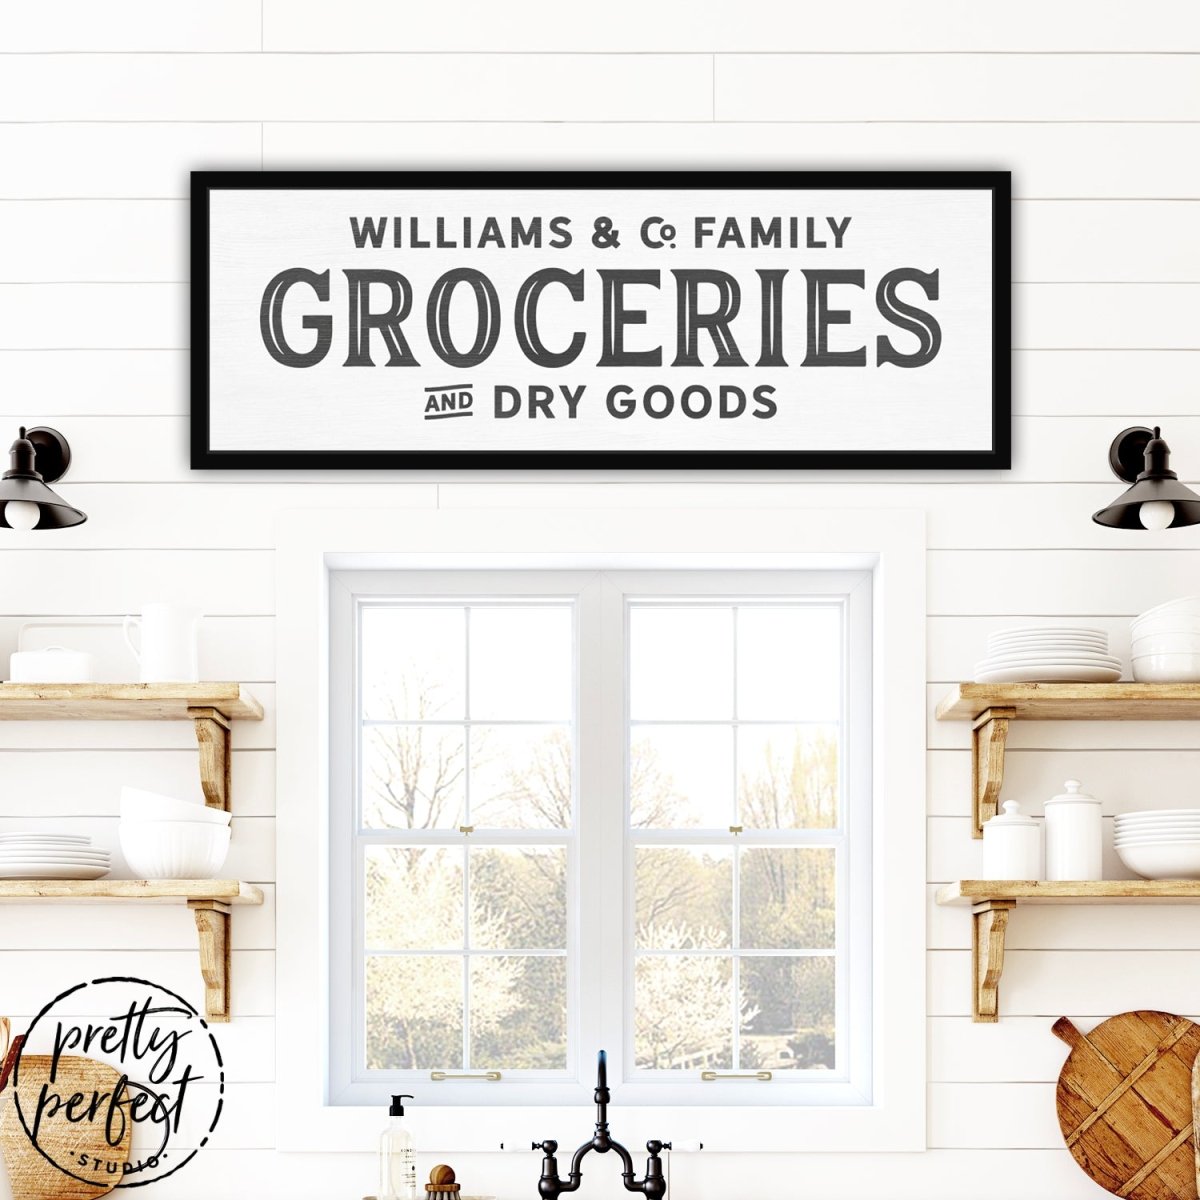 Personalized Family Grocery Sign Hanging Above Window in Kitchen - Pretty Perfect Studio